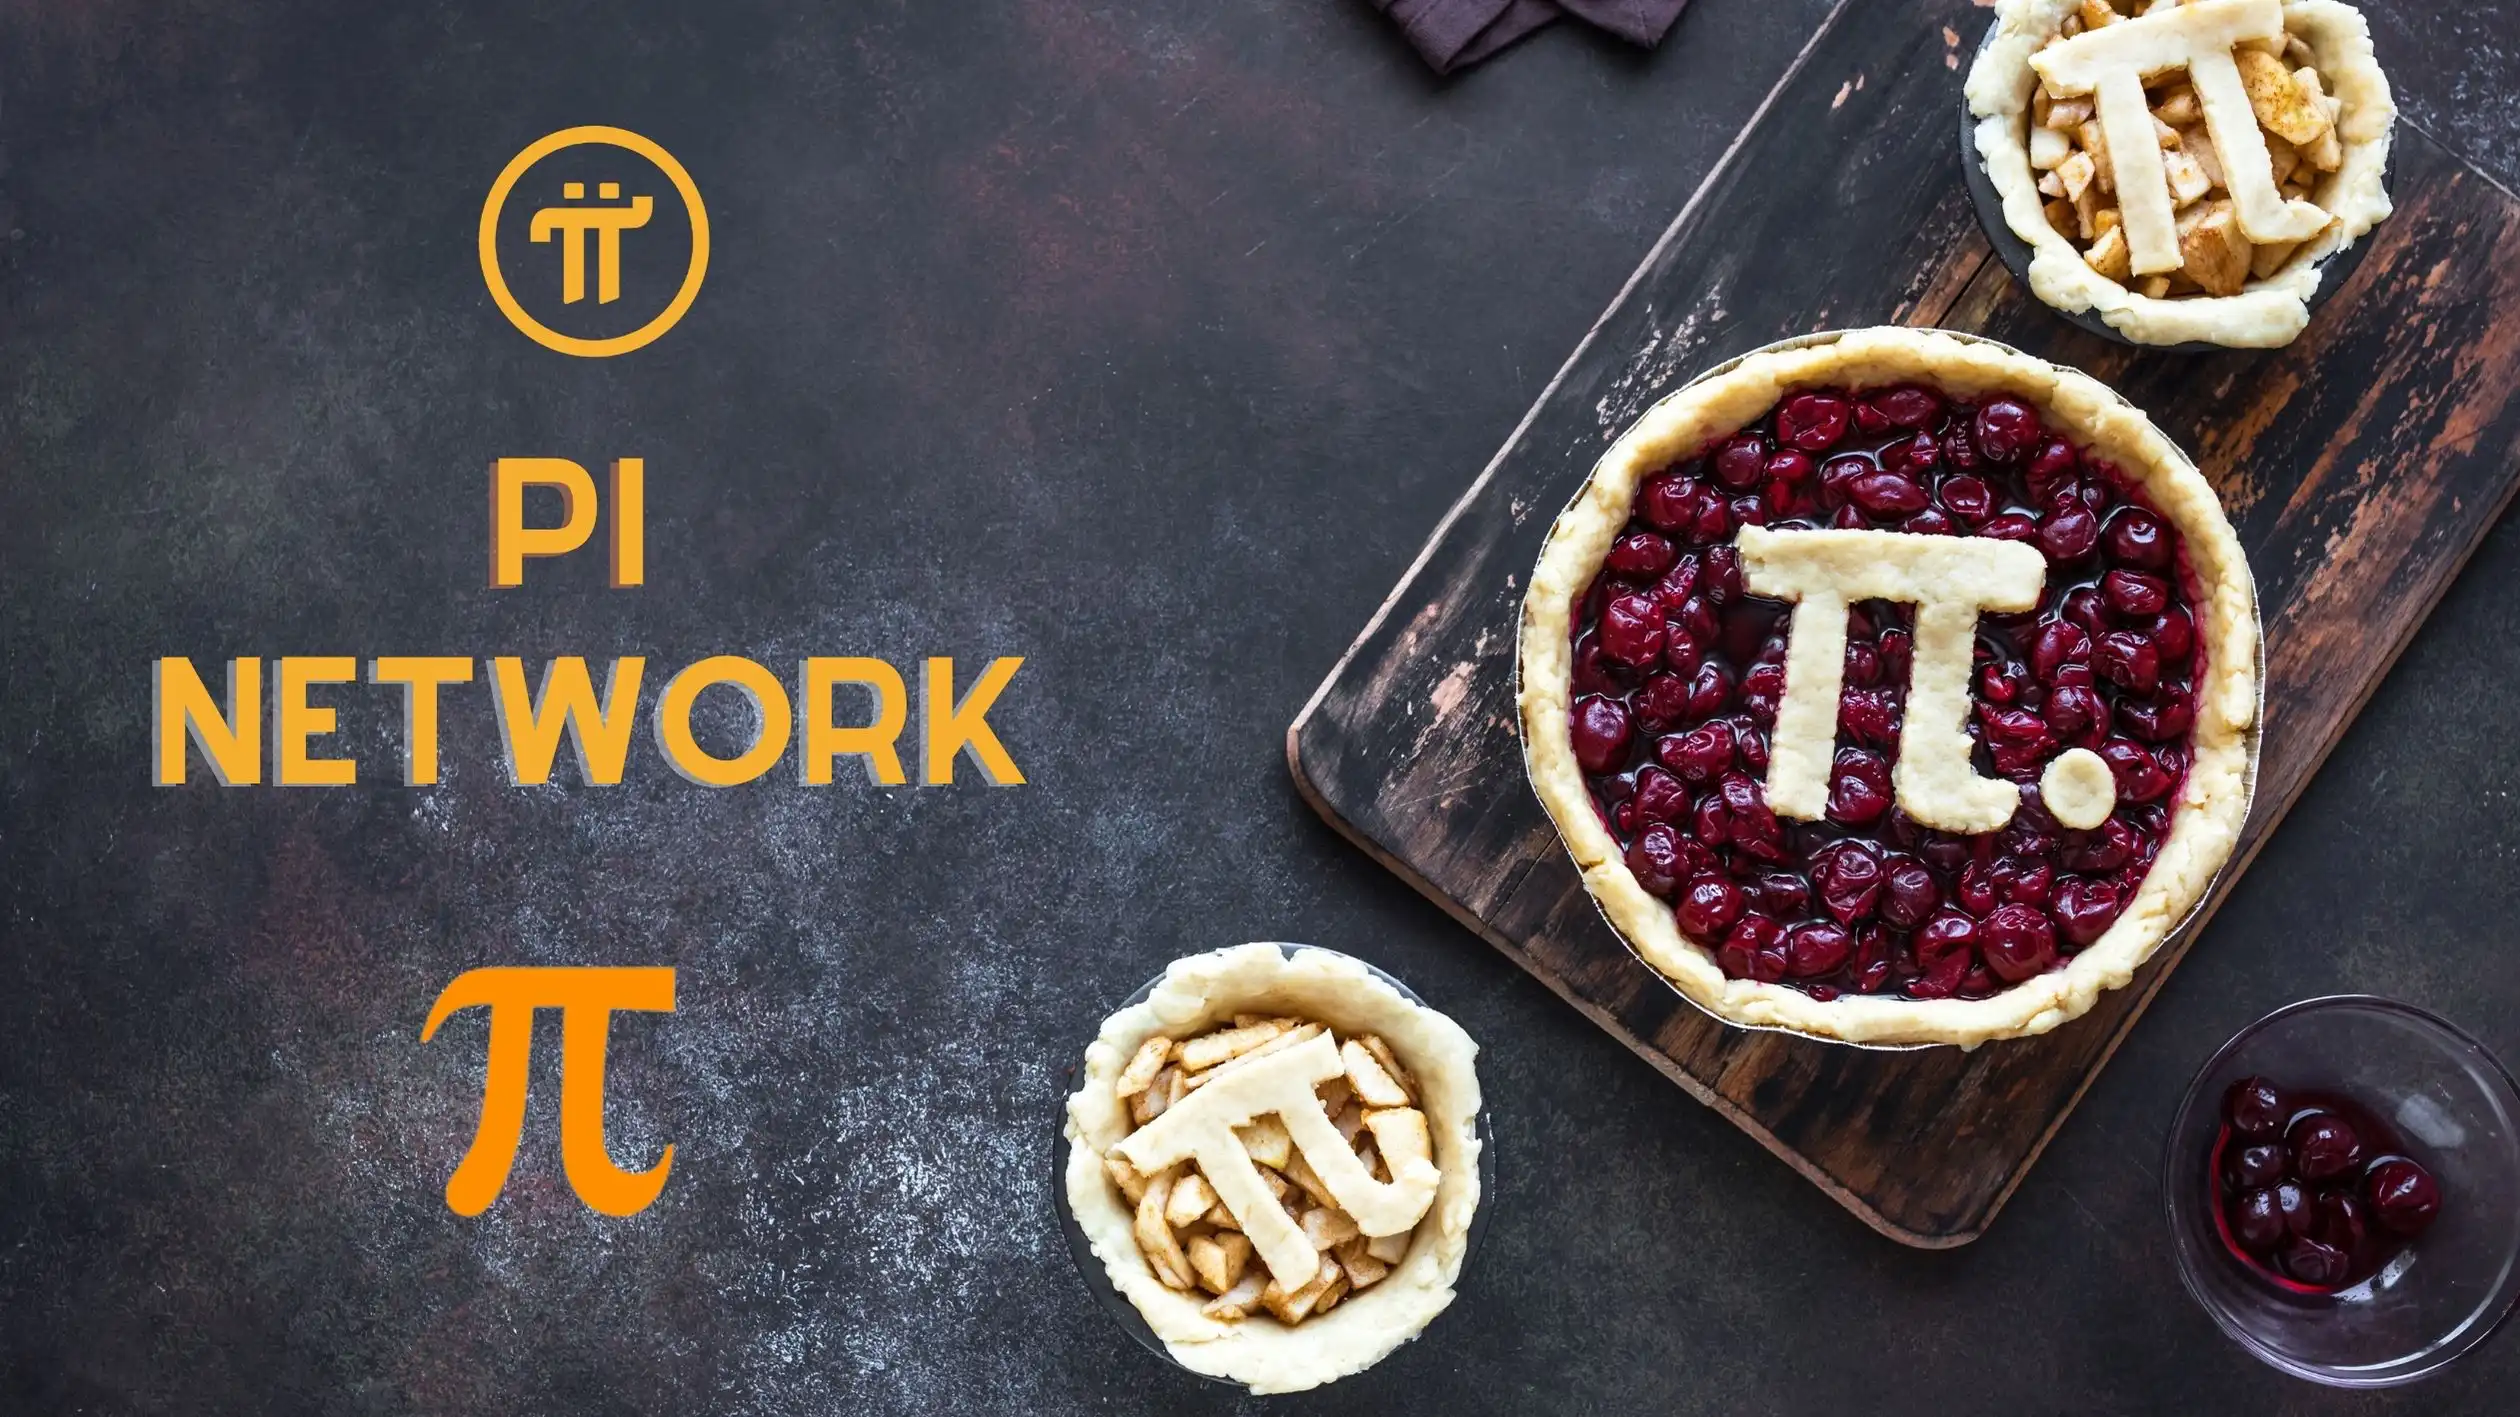 Pi Coin price falls to $50 taking Pi Network YTD losses to 80% 